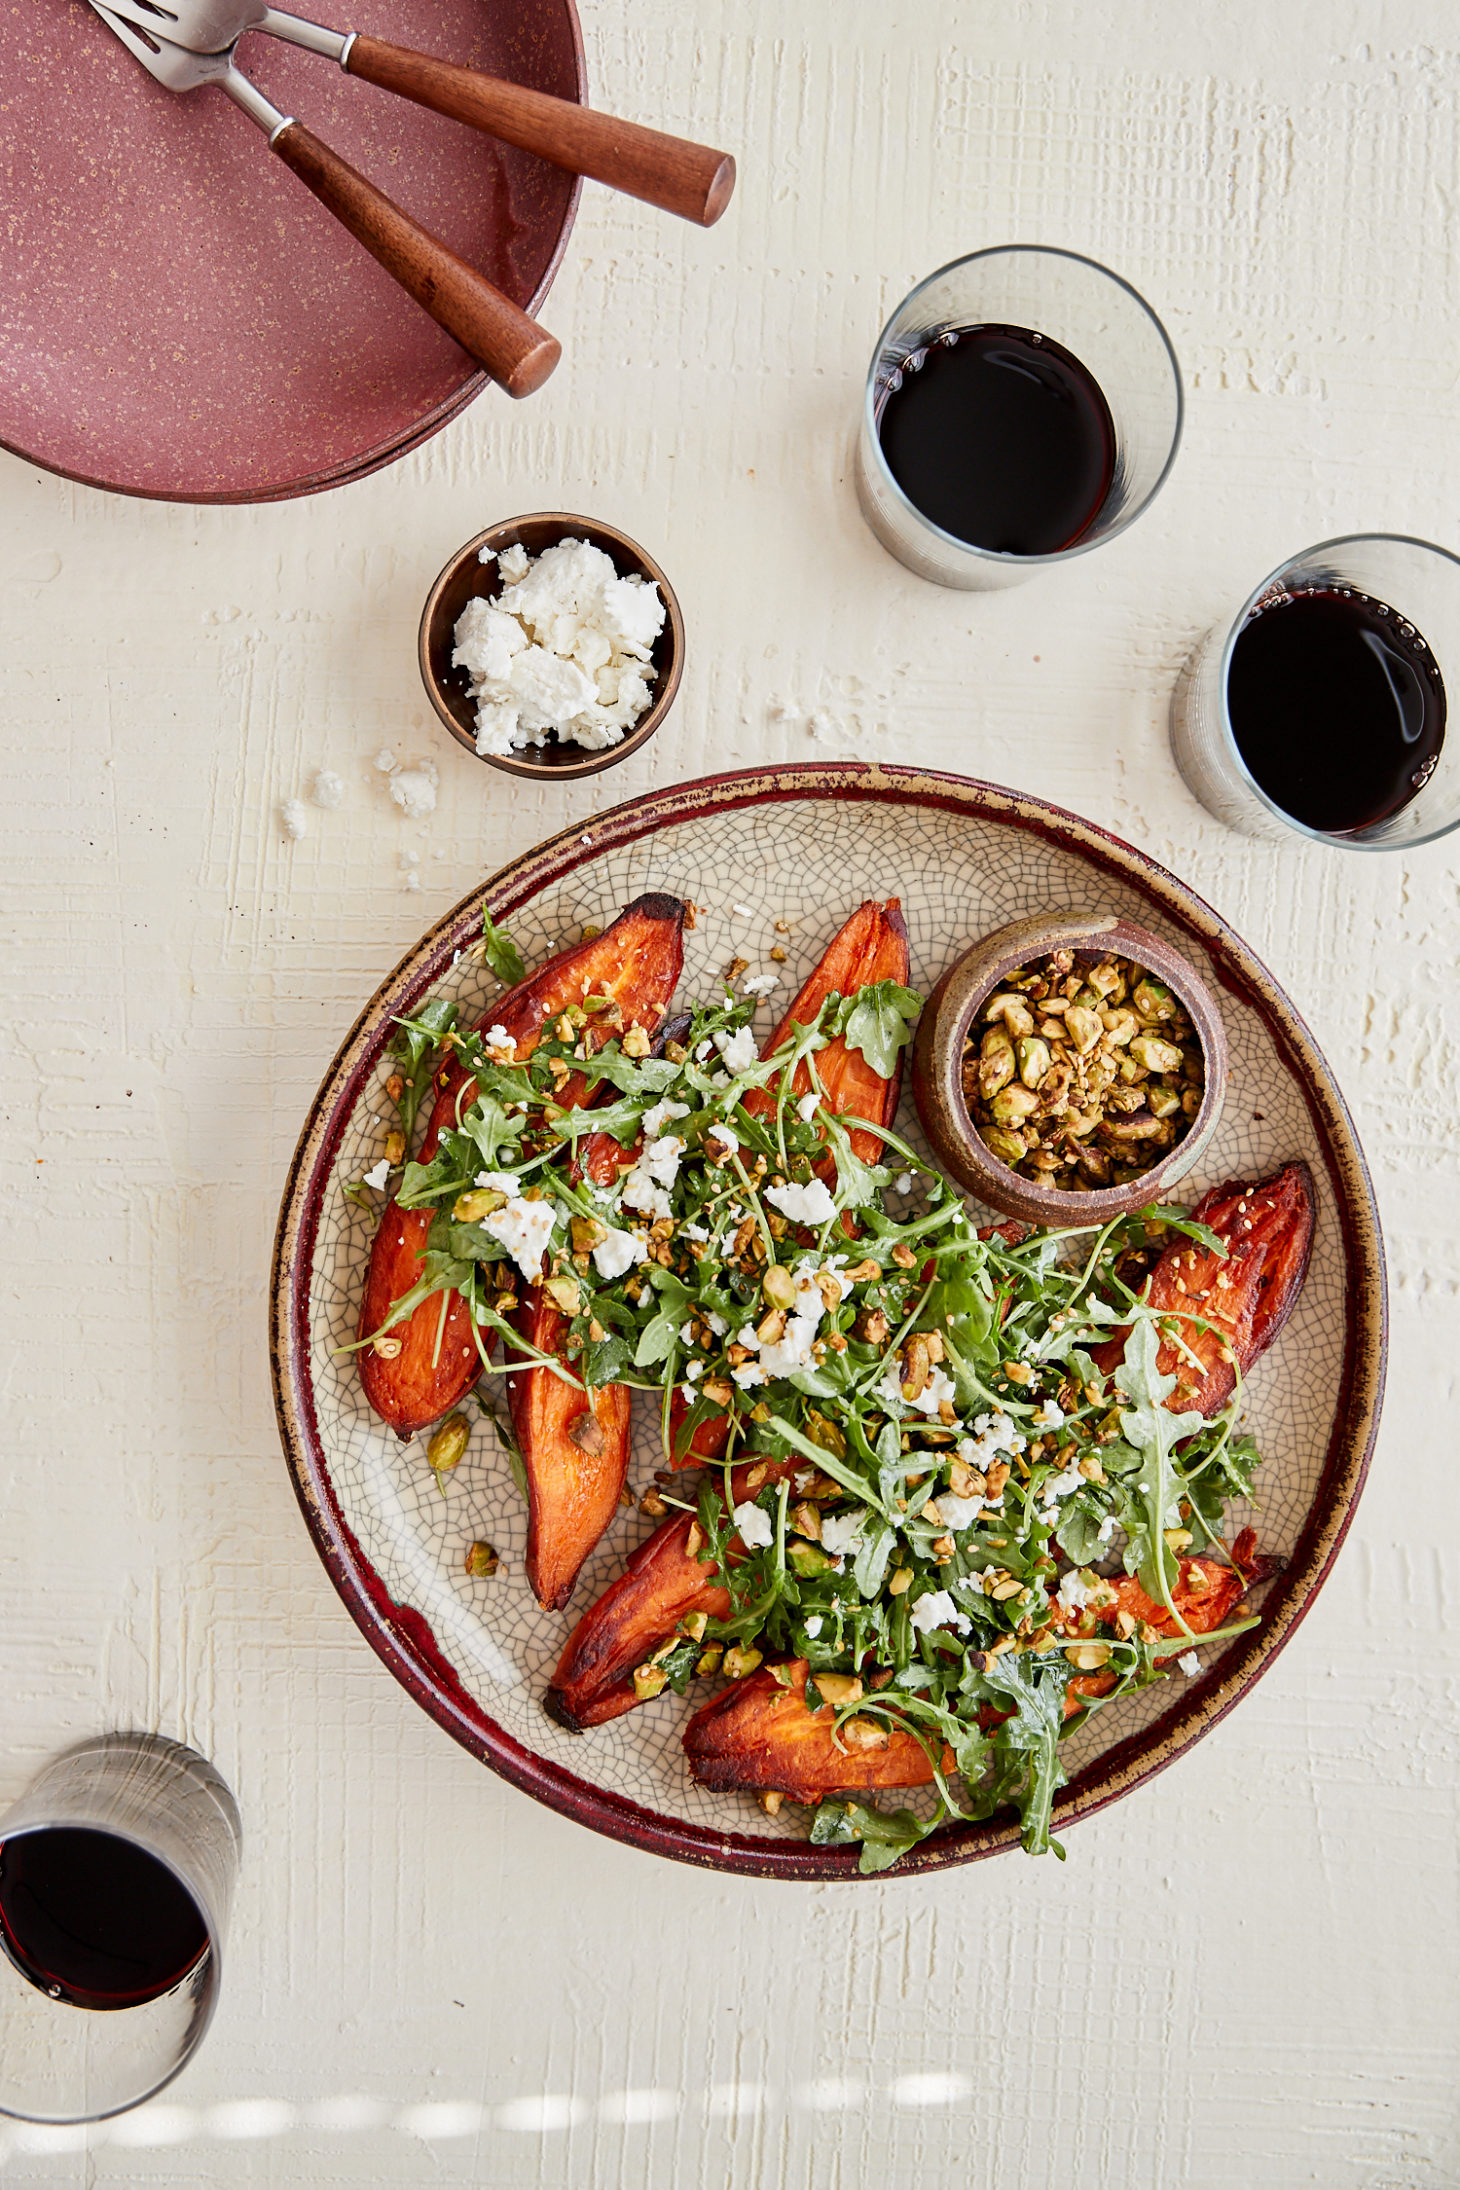 Sweet Potatoes with Sesame-Pistachios and Miso-Citrus Dressing